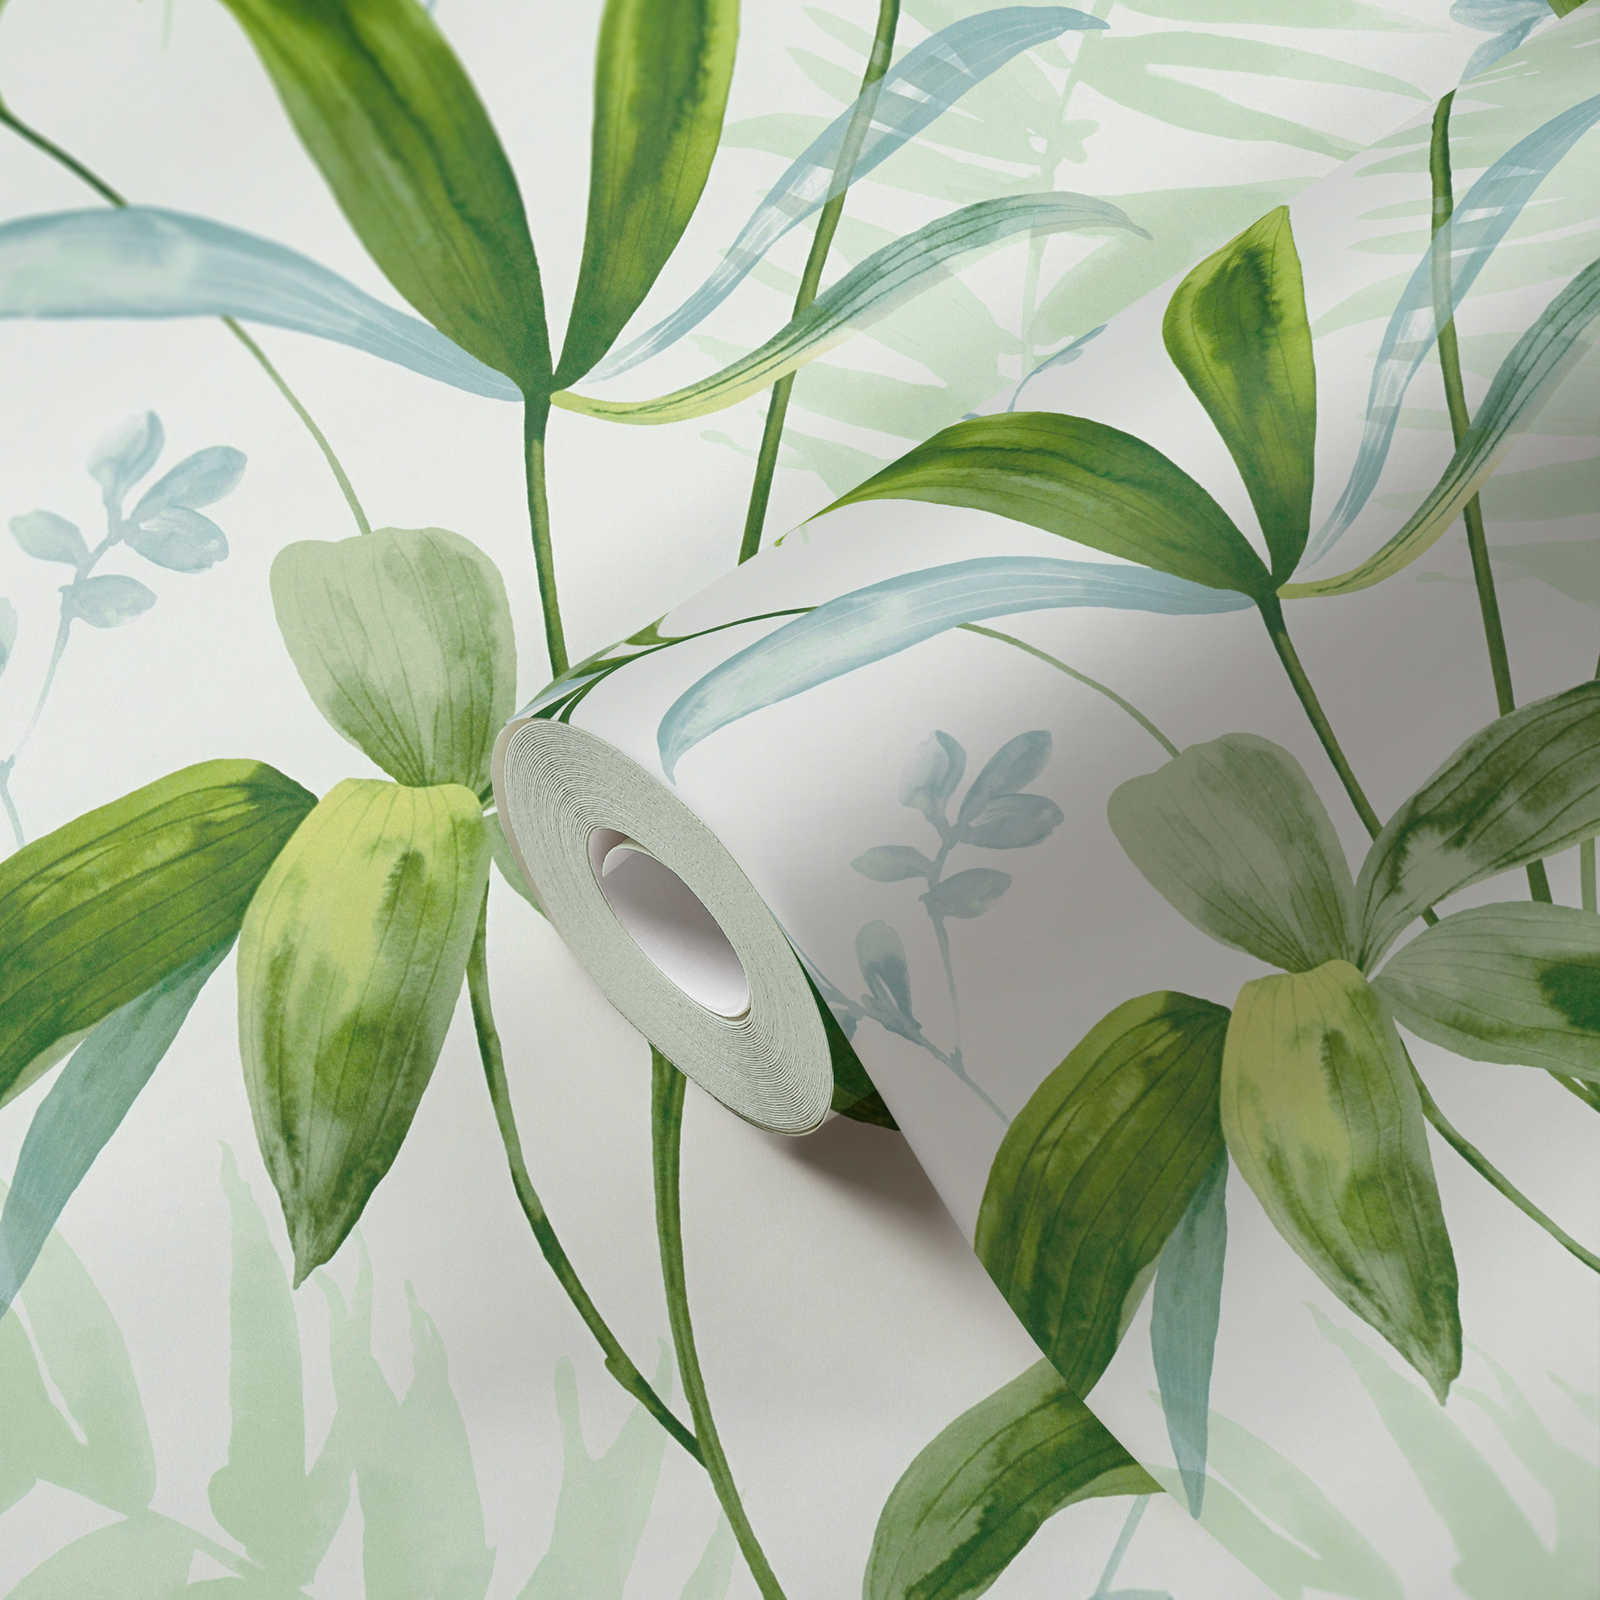             Non-woven wallpaper green leaves in watercolour style - green, white
        